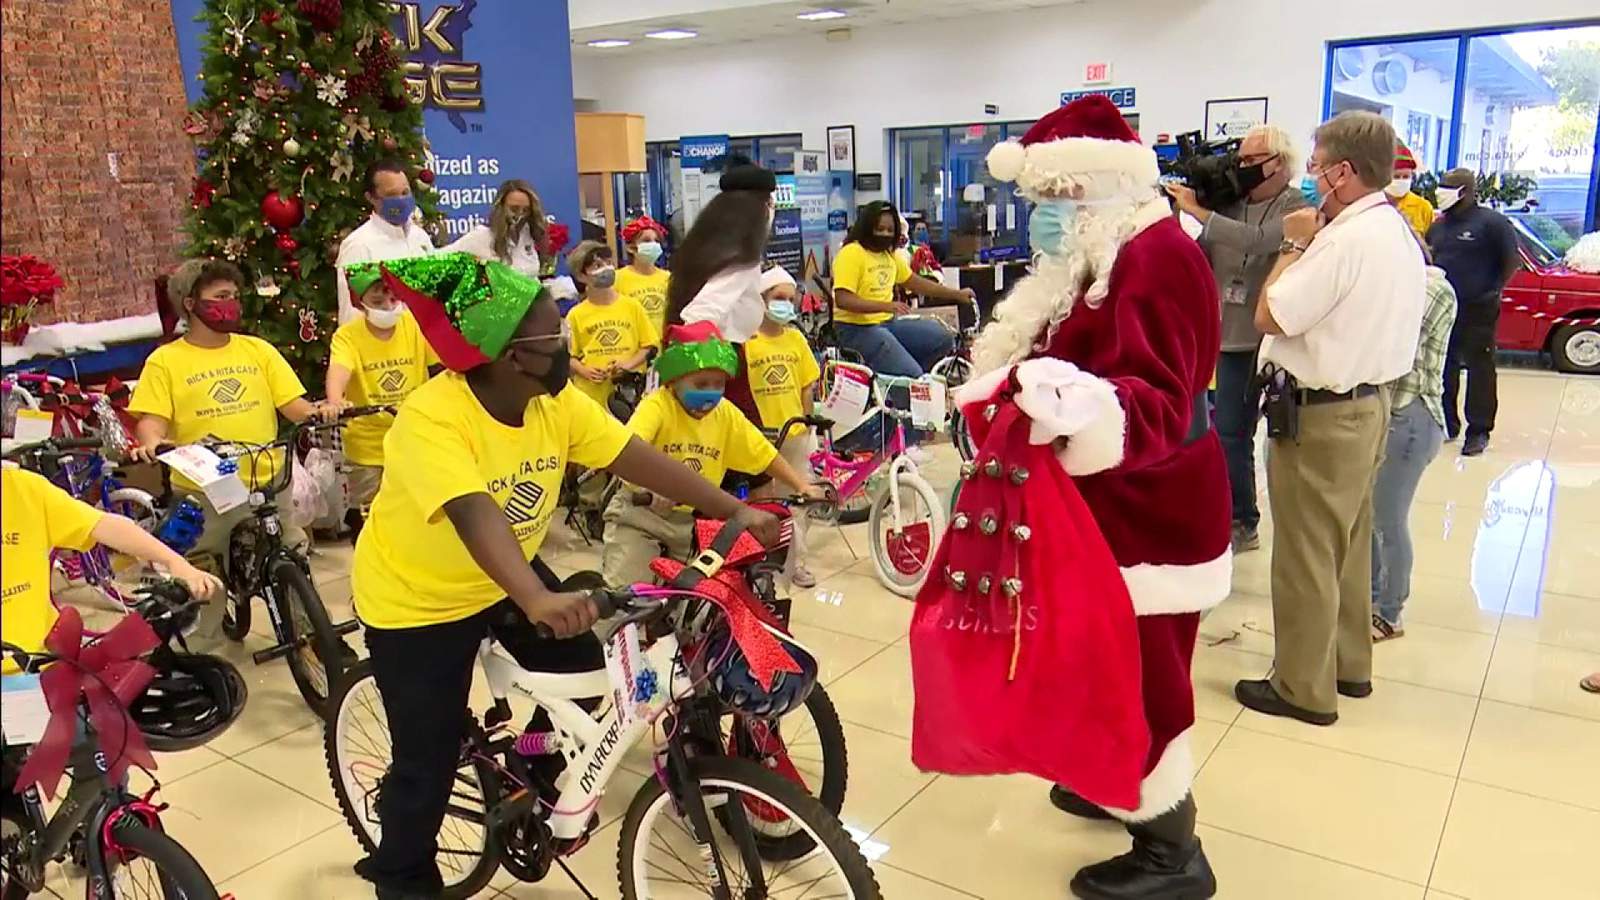 Several organizations helping provide holiday gifts to struggling South Florida families